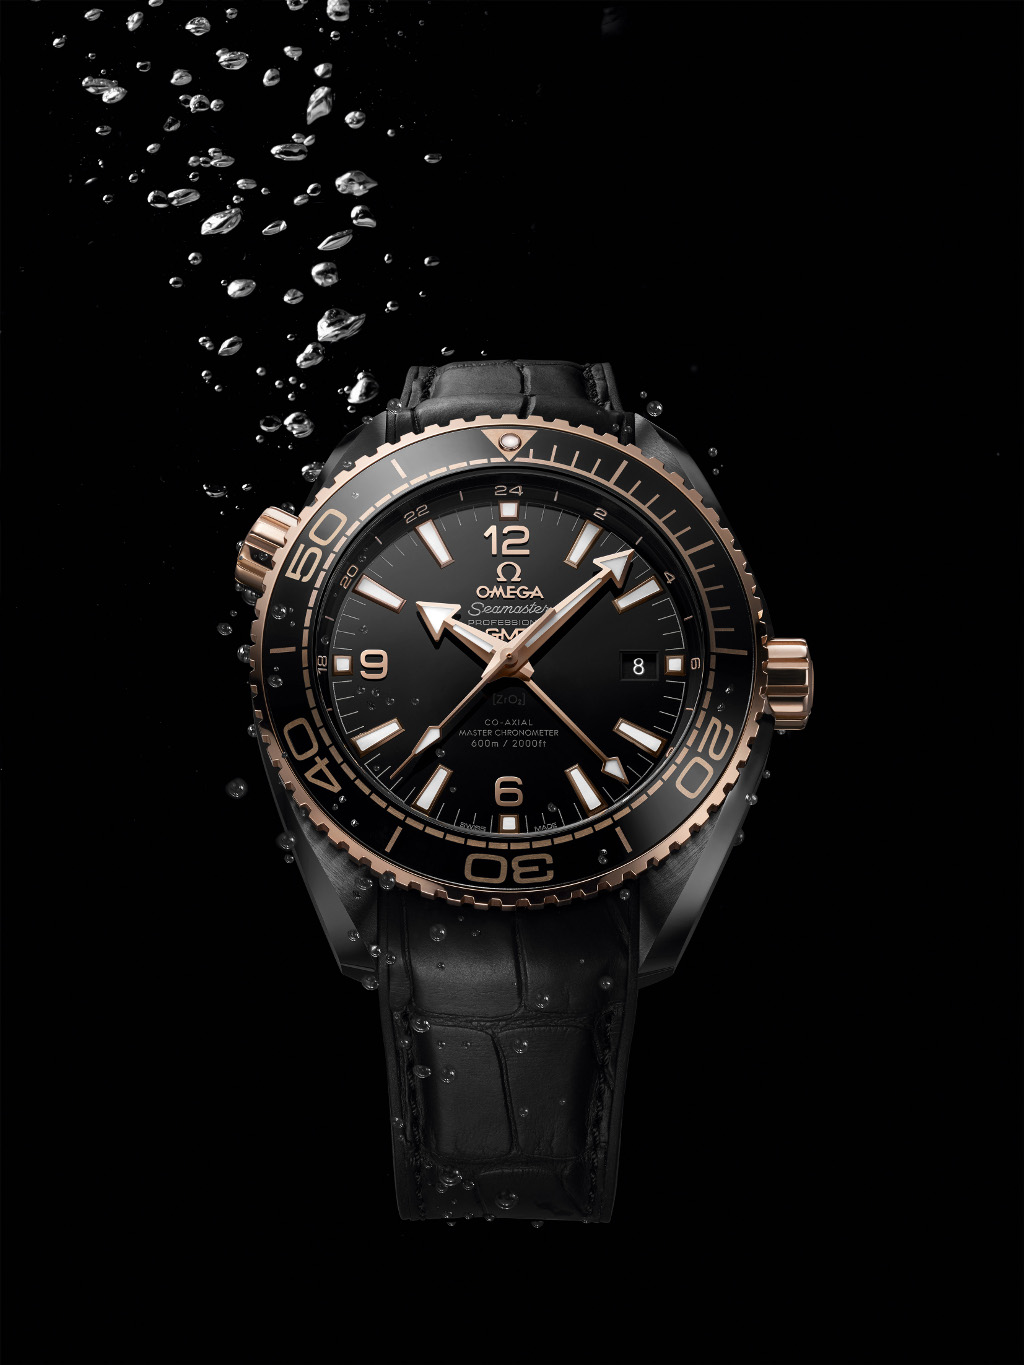 The "Deep Black" with 18K Sedna Gold. 